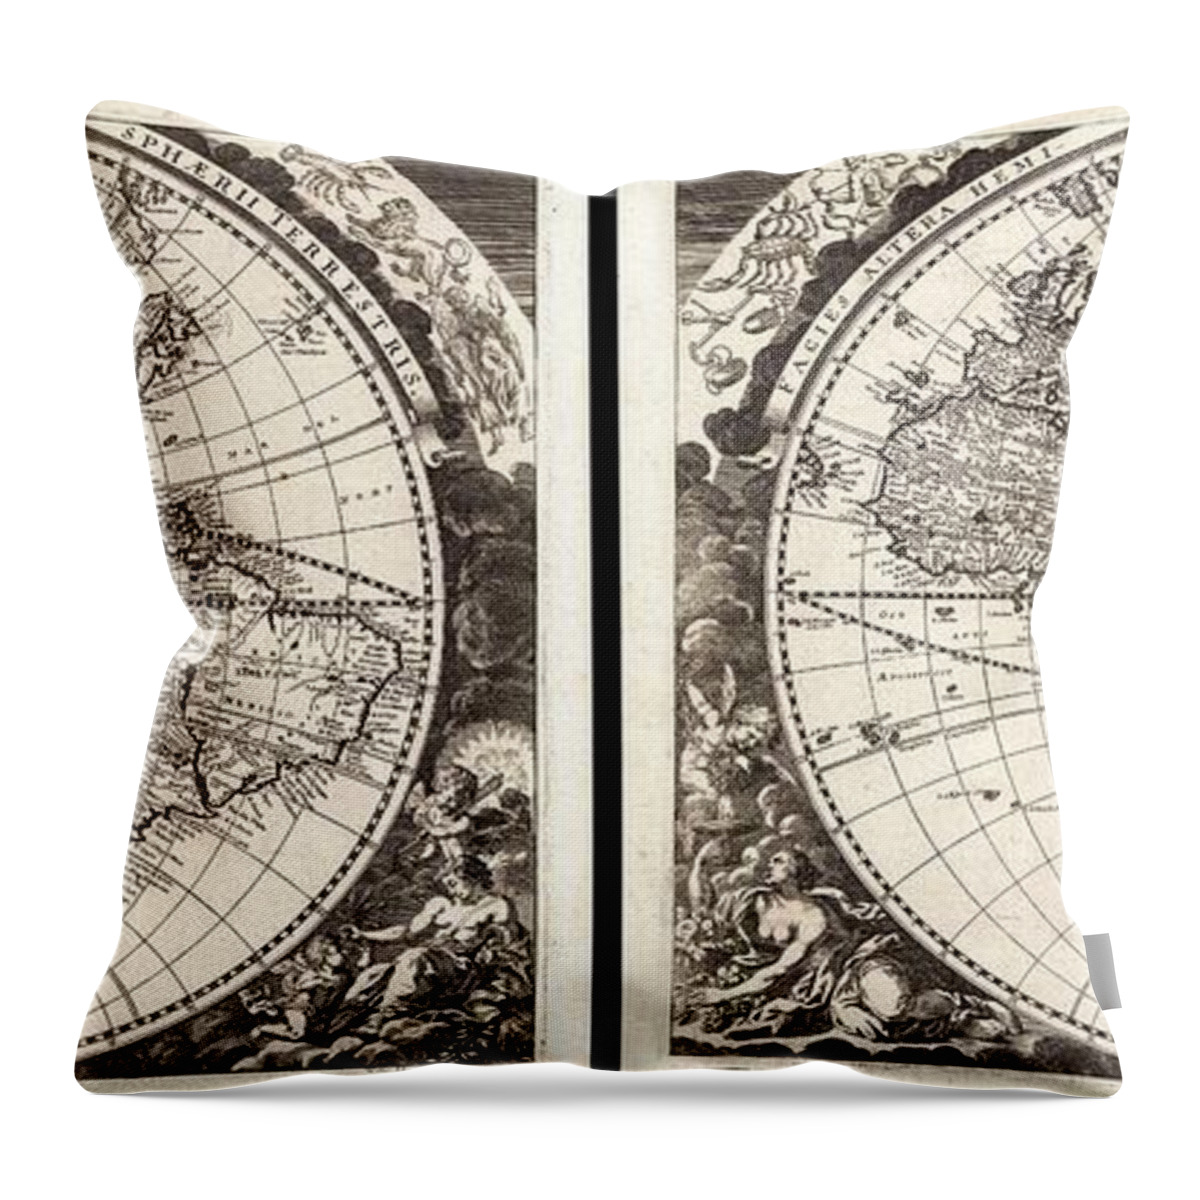 Antique Map Of The World Throw Pillow featuring the drawing Antique Maps - Old Cartographic maps - Antique Map of the World in Two Hemispheres, 1696 by Studio Grafiikka